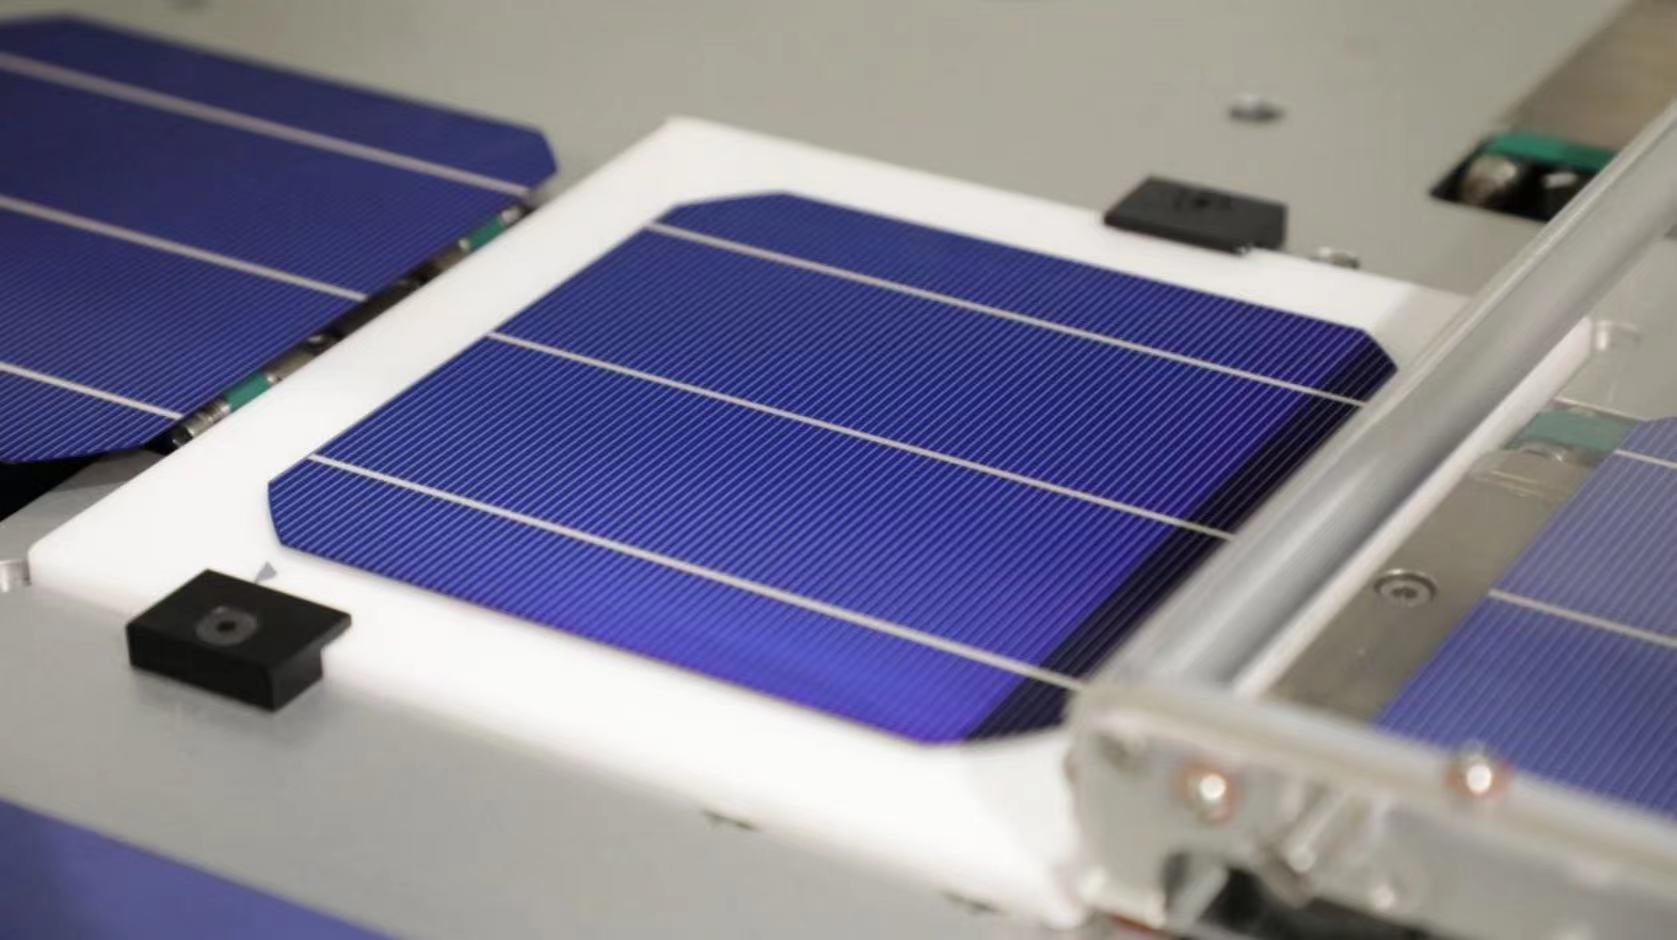 Laser-assisted sintering improves the performance of  TOPCon solar cell